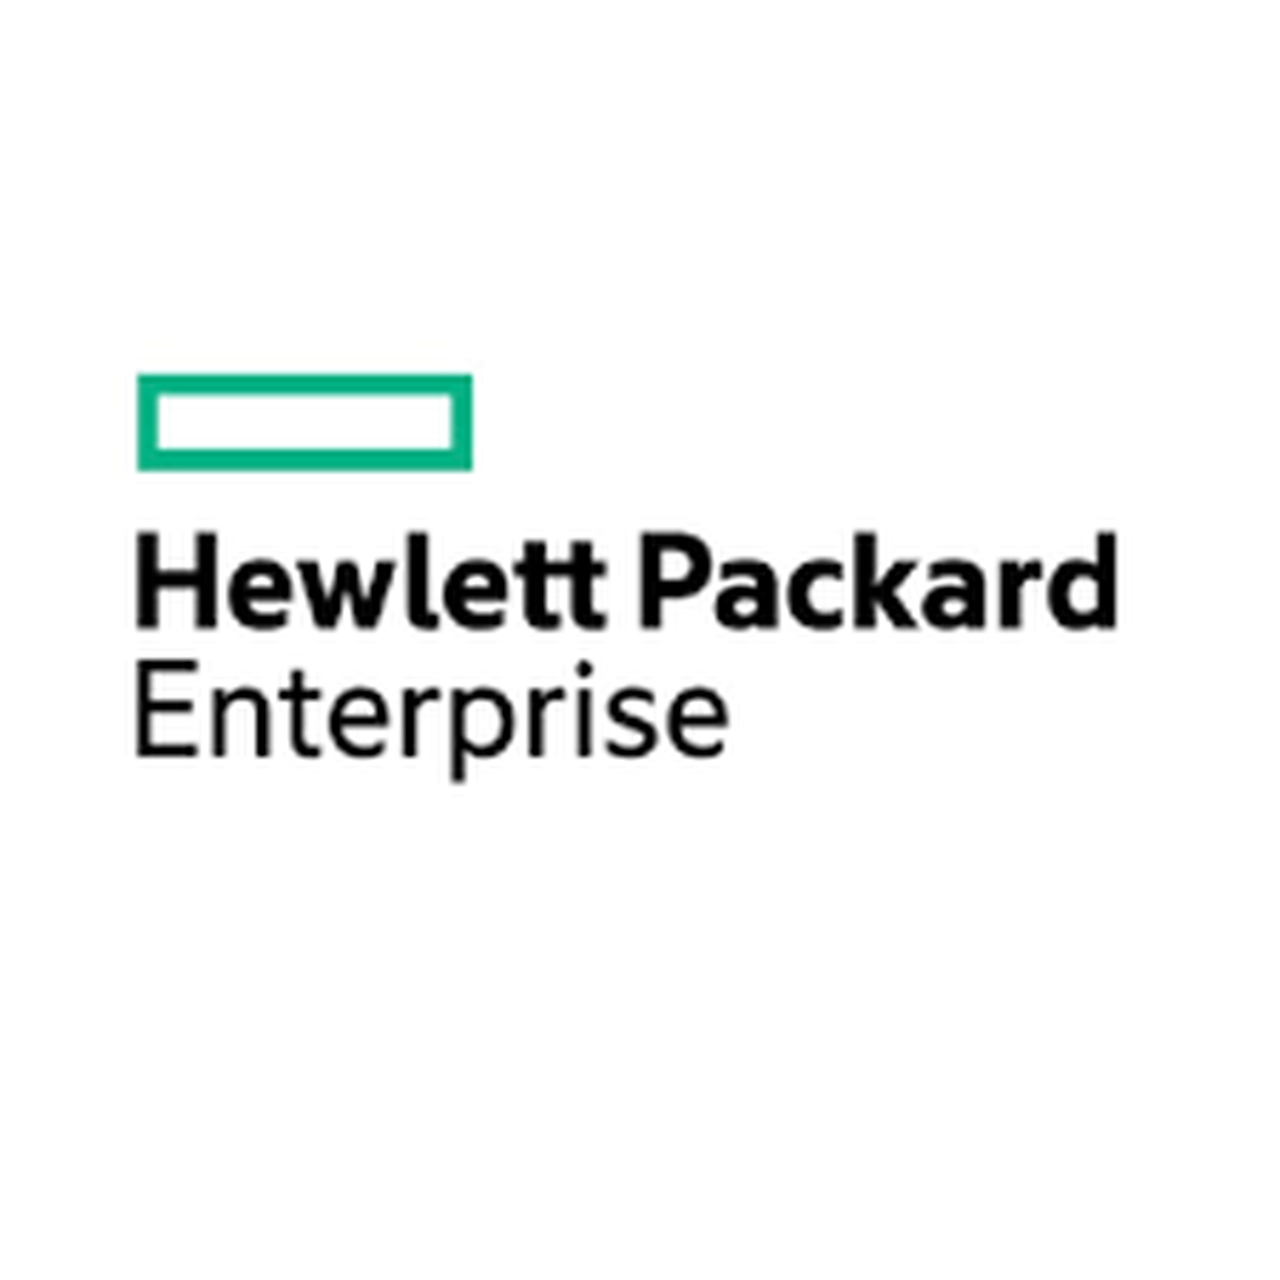 HPE 5940 48p 10GBT/6p 100G 2 F PS Thailand - English localization